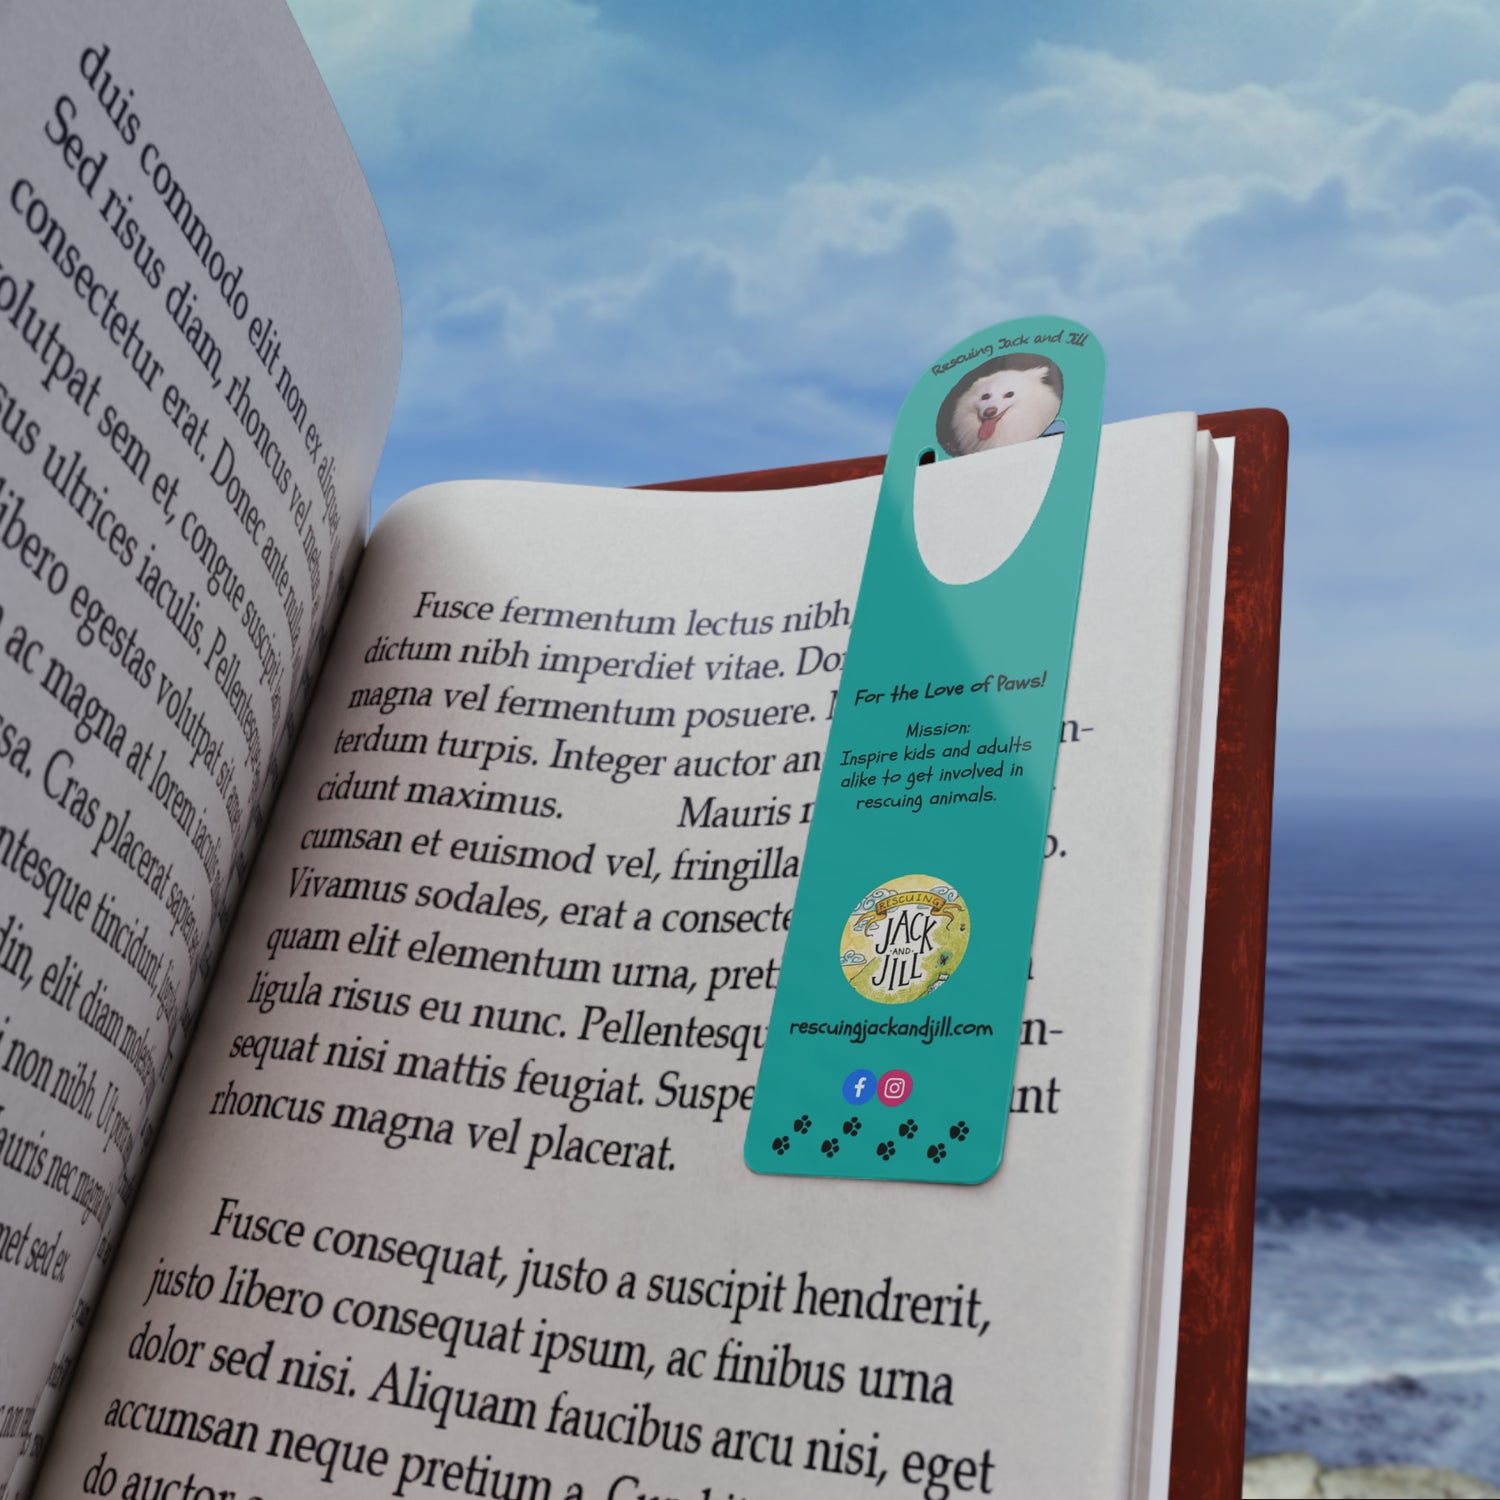 Rescuing Jack and Jill - Book Marker - &quot;Mission:  Inspire kids and adults alike to get involved in rescuing animals!&quot;